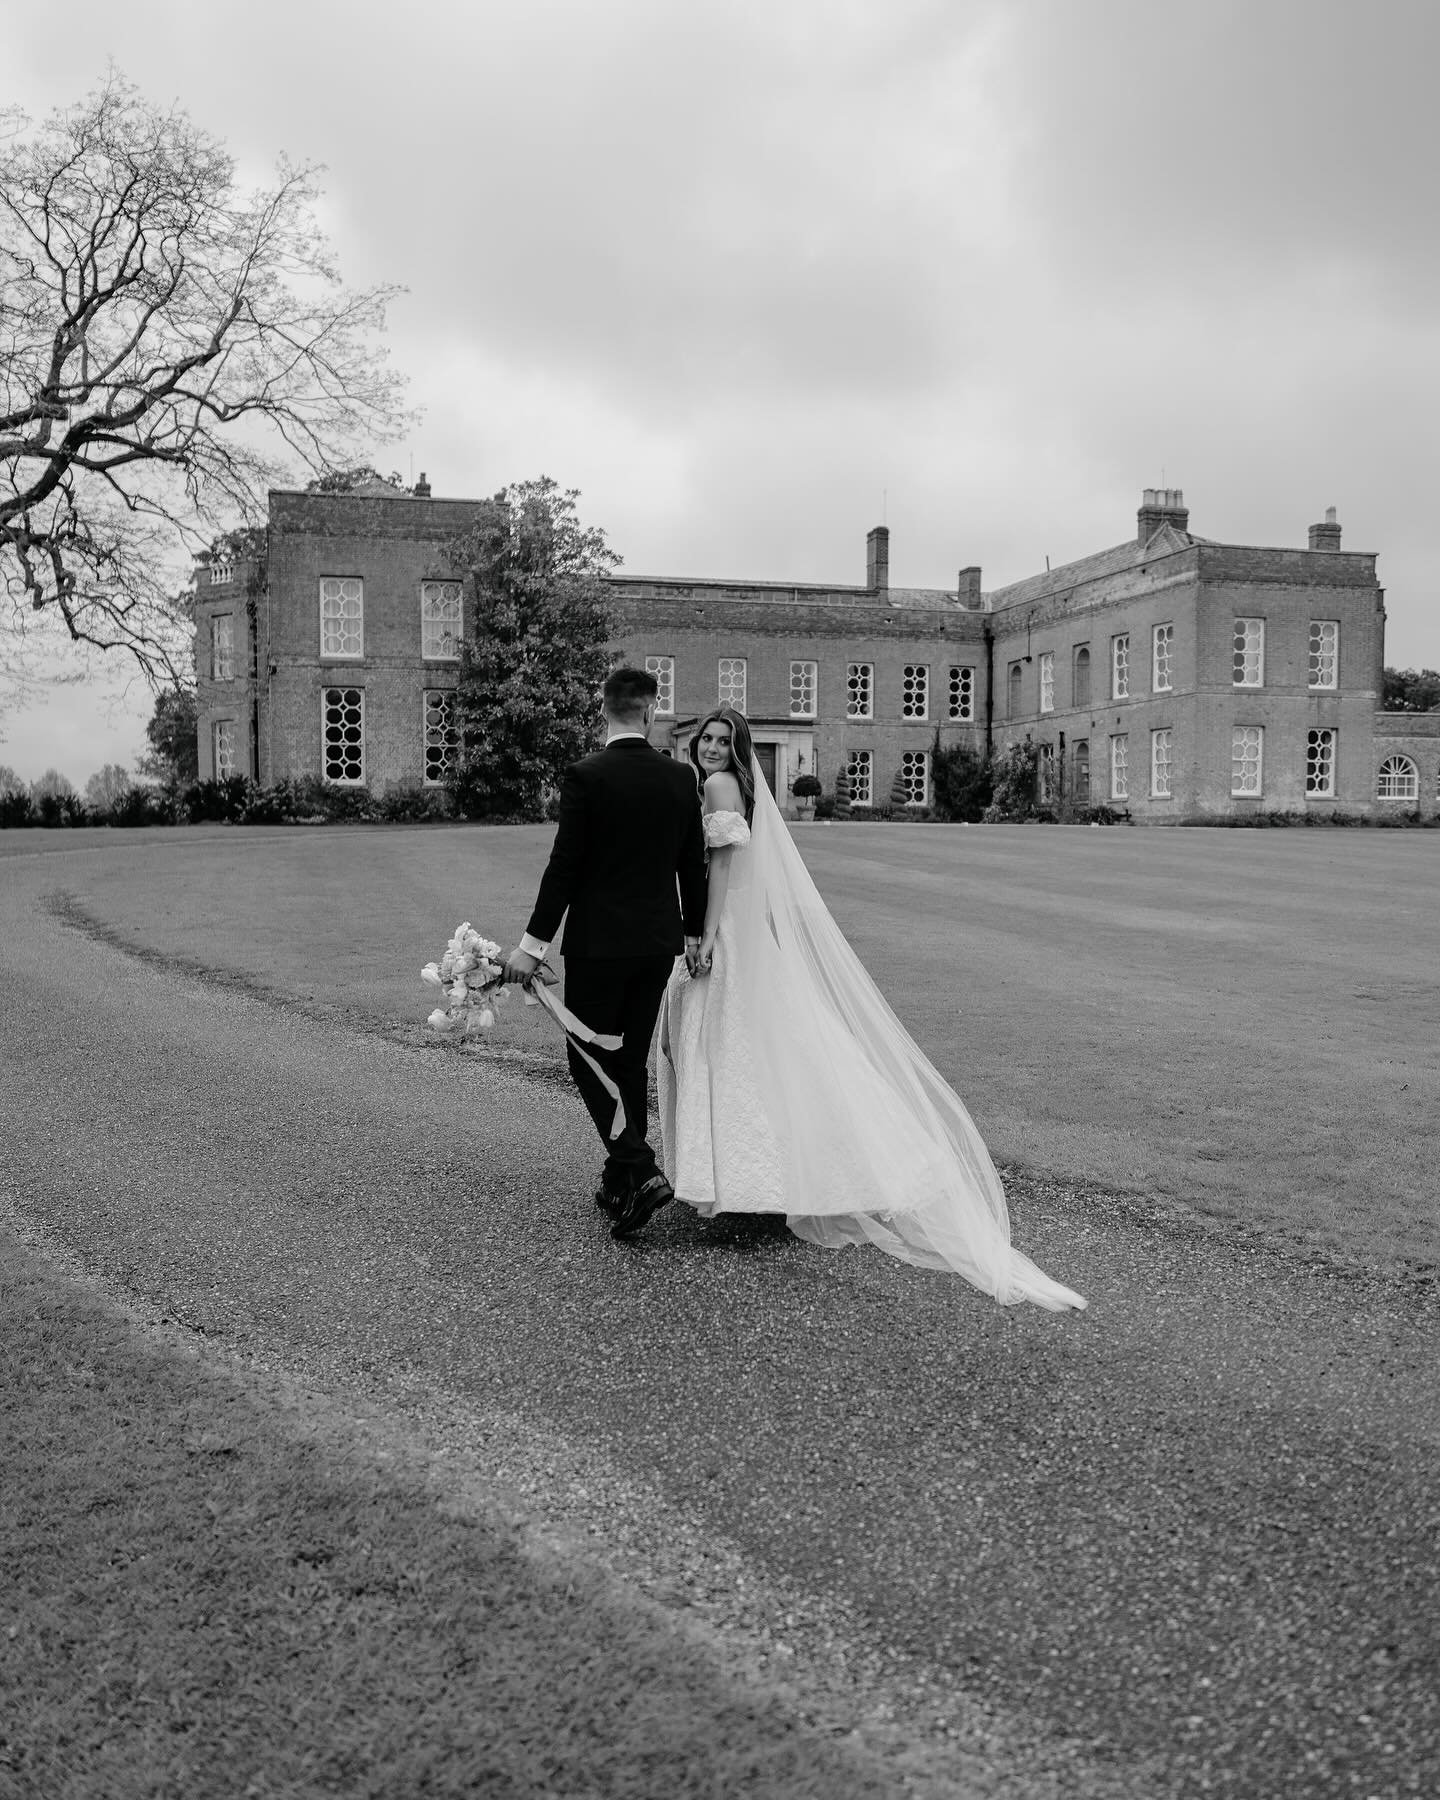 Braxted Park making the most gorgeous back drop for these photos - did you know I cover all or the UK and European destinations too&hellip; If you are still looking for a photographer to capture your day, get in touch to see if I am still available -